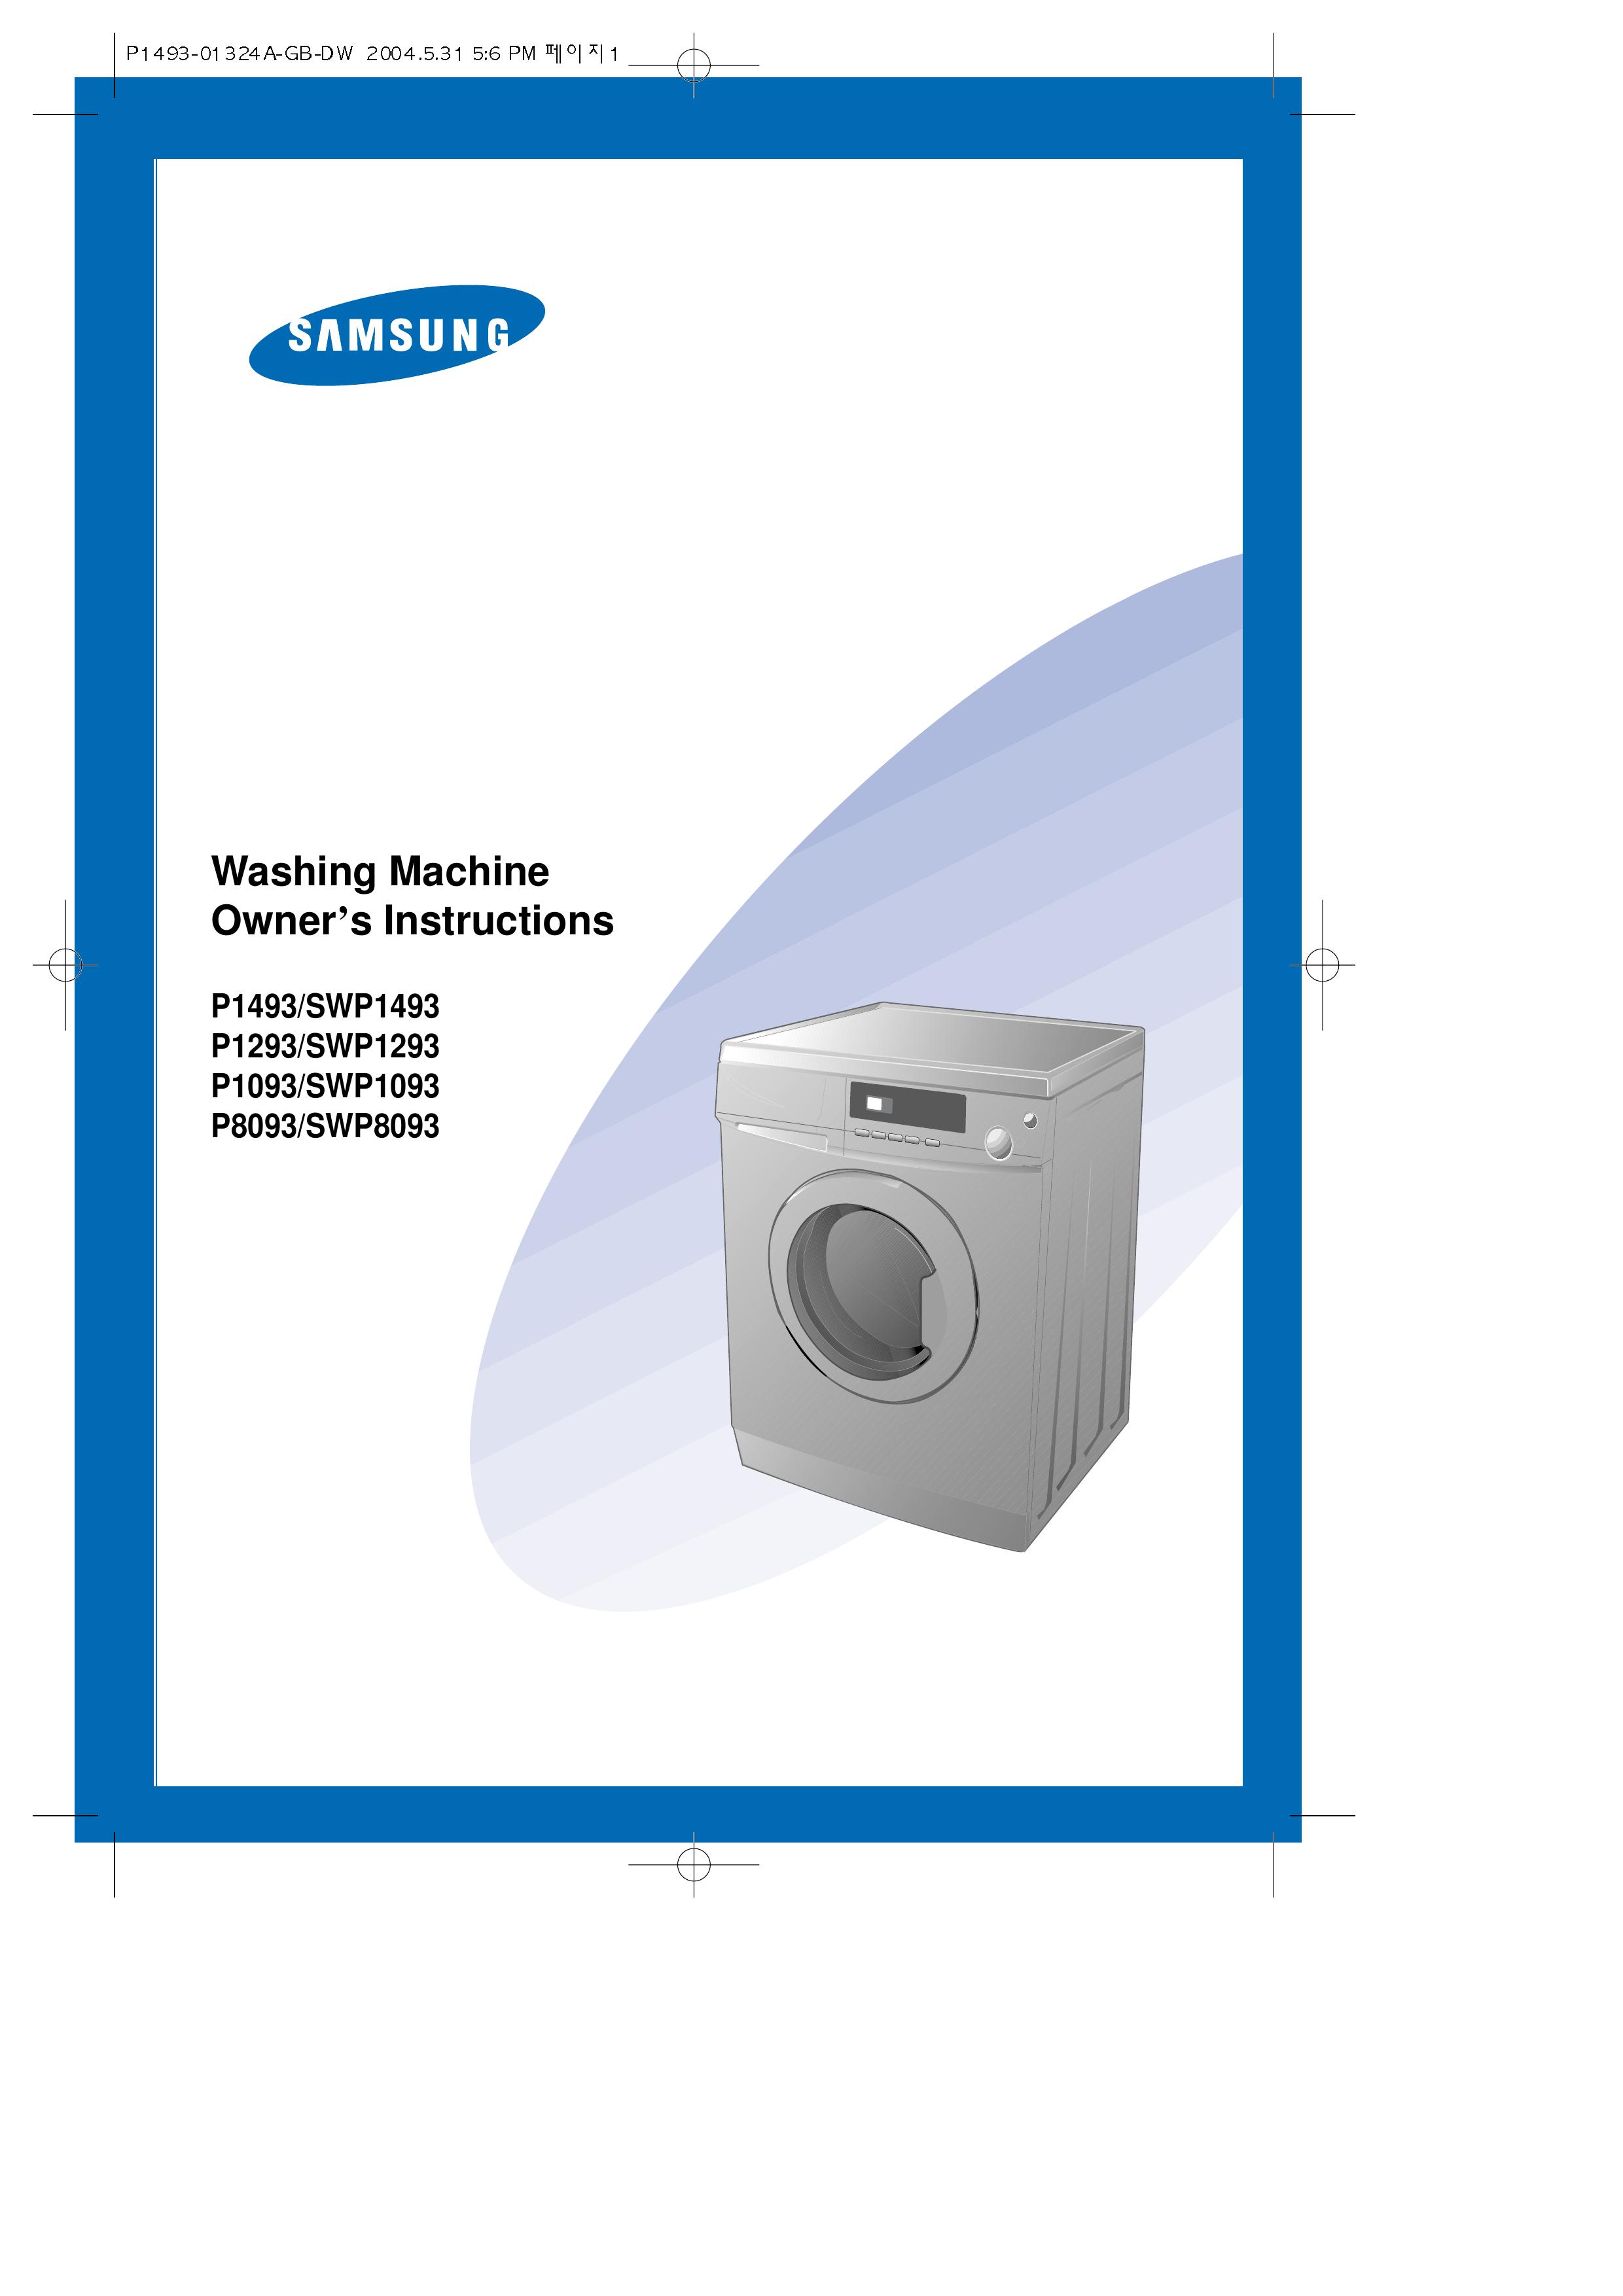 Samsung SWP8093 Washer/Dryer User Manual